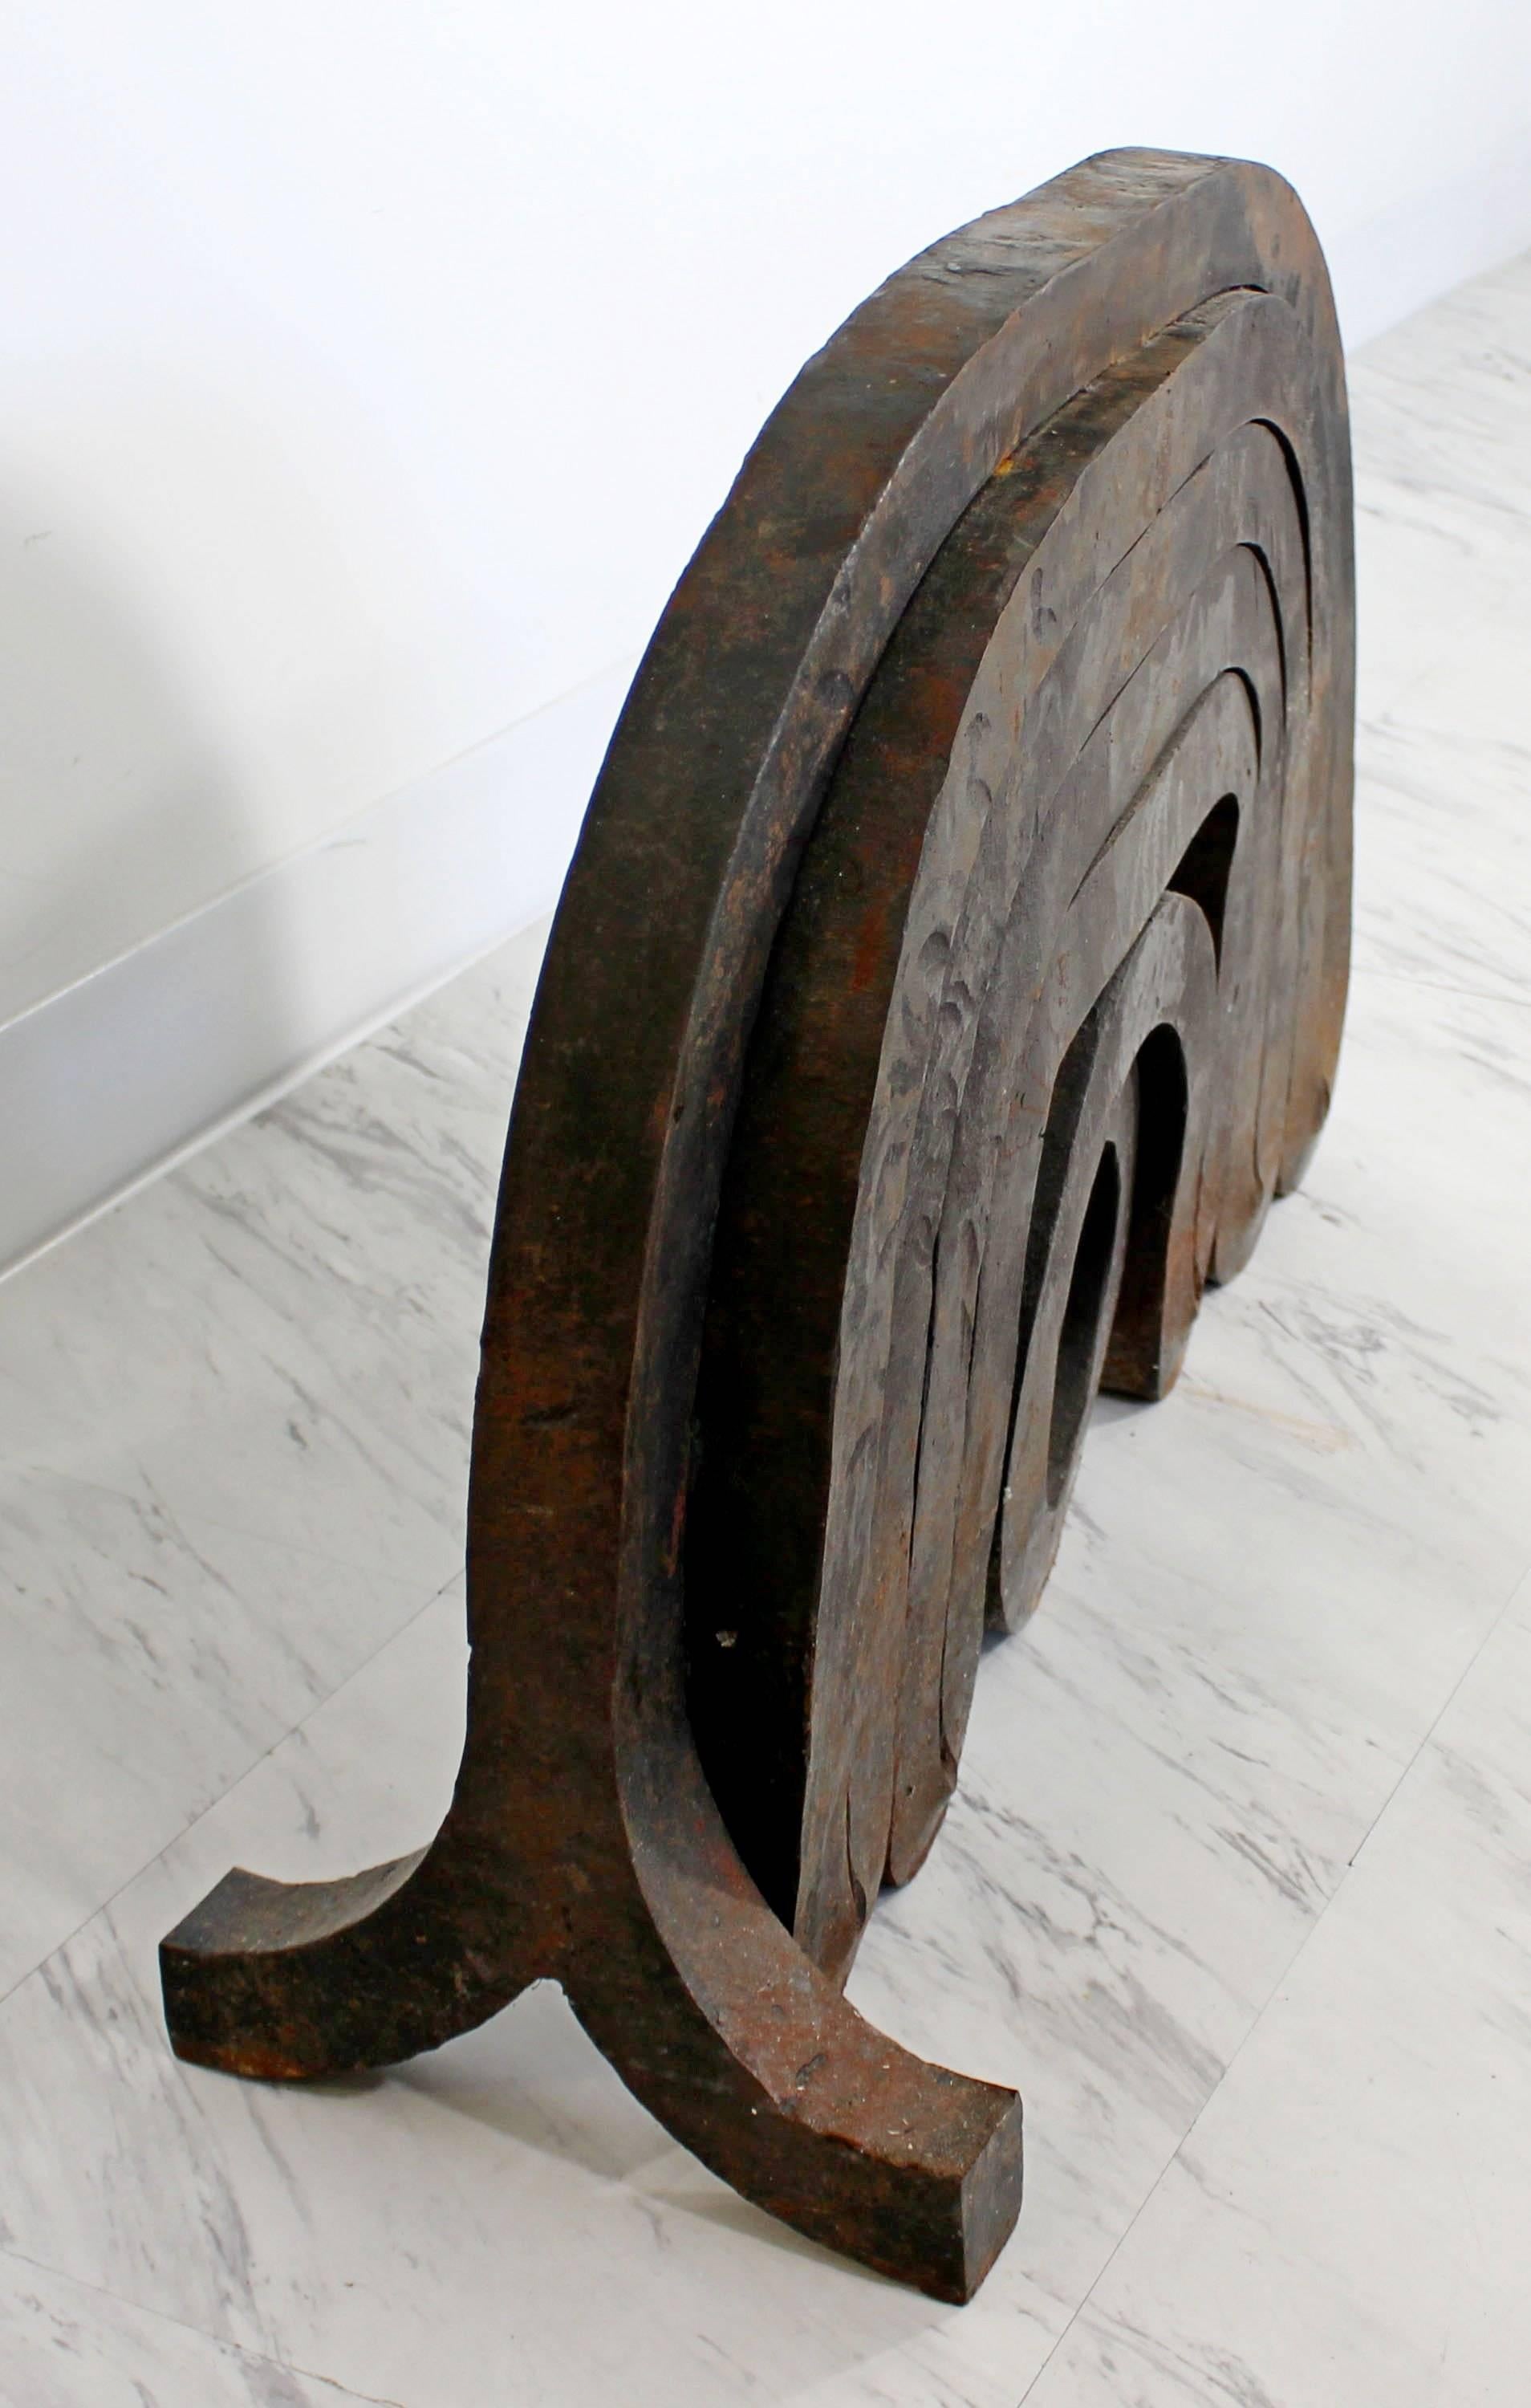 Post-Modern Forged Steel Sculpture by Martin Chirino Lopez Titled Laberintia, 1987